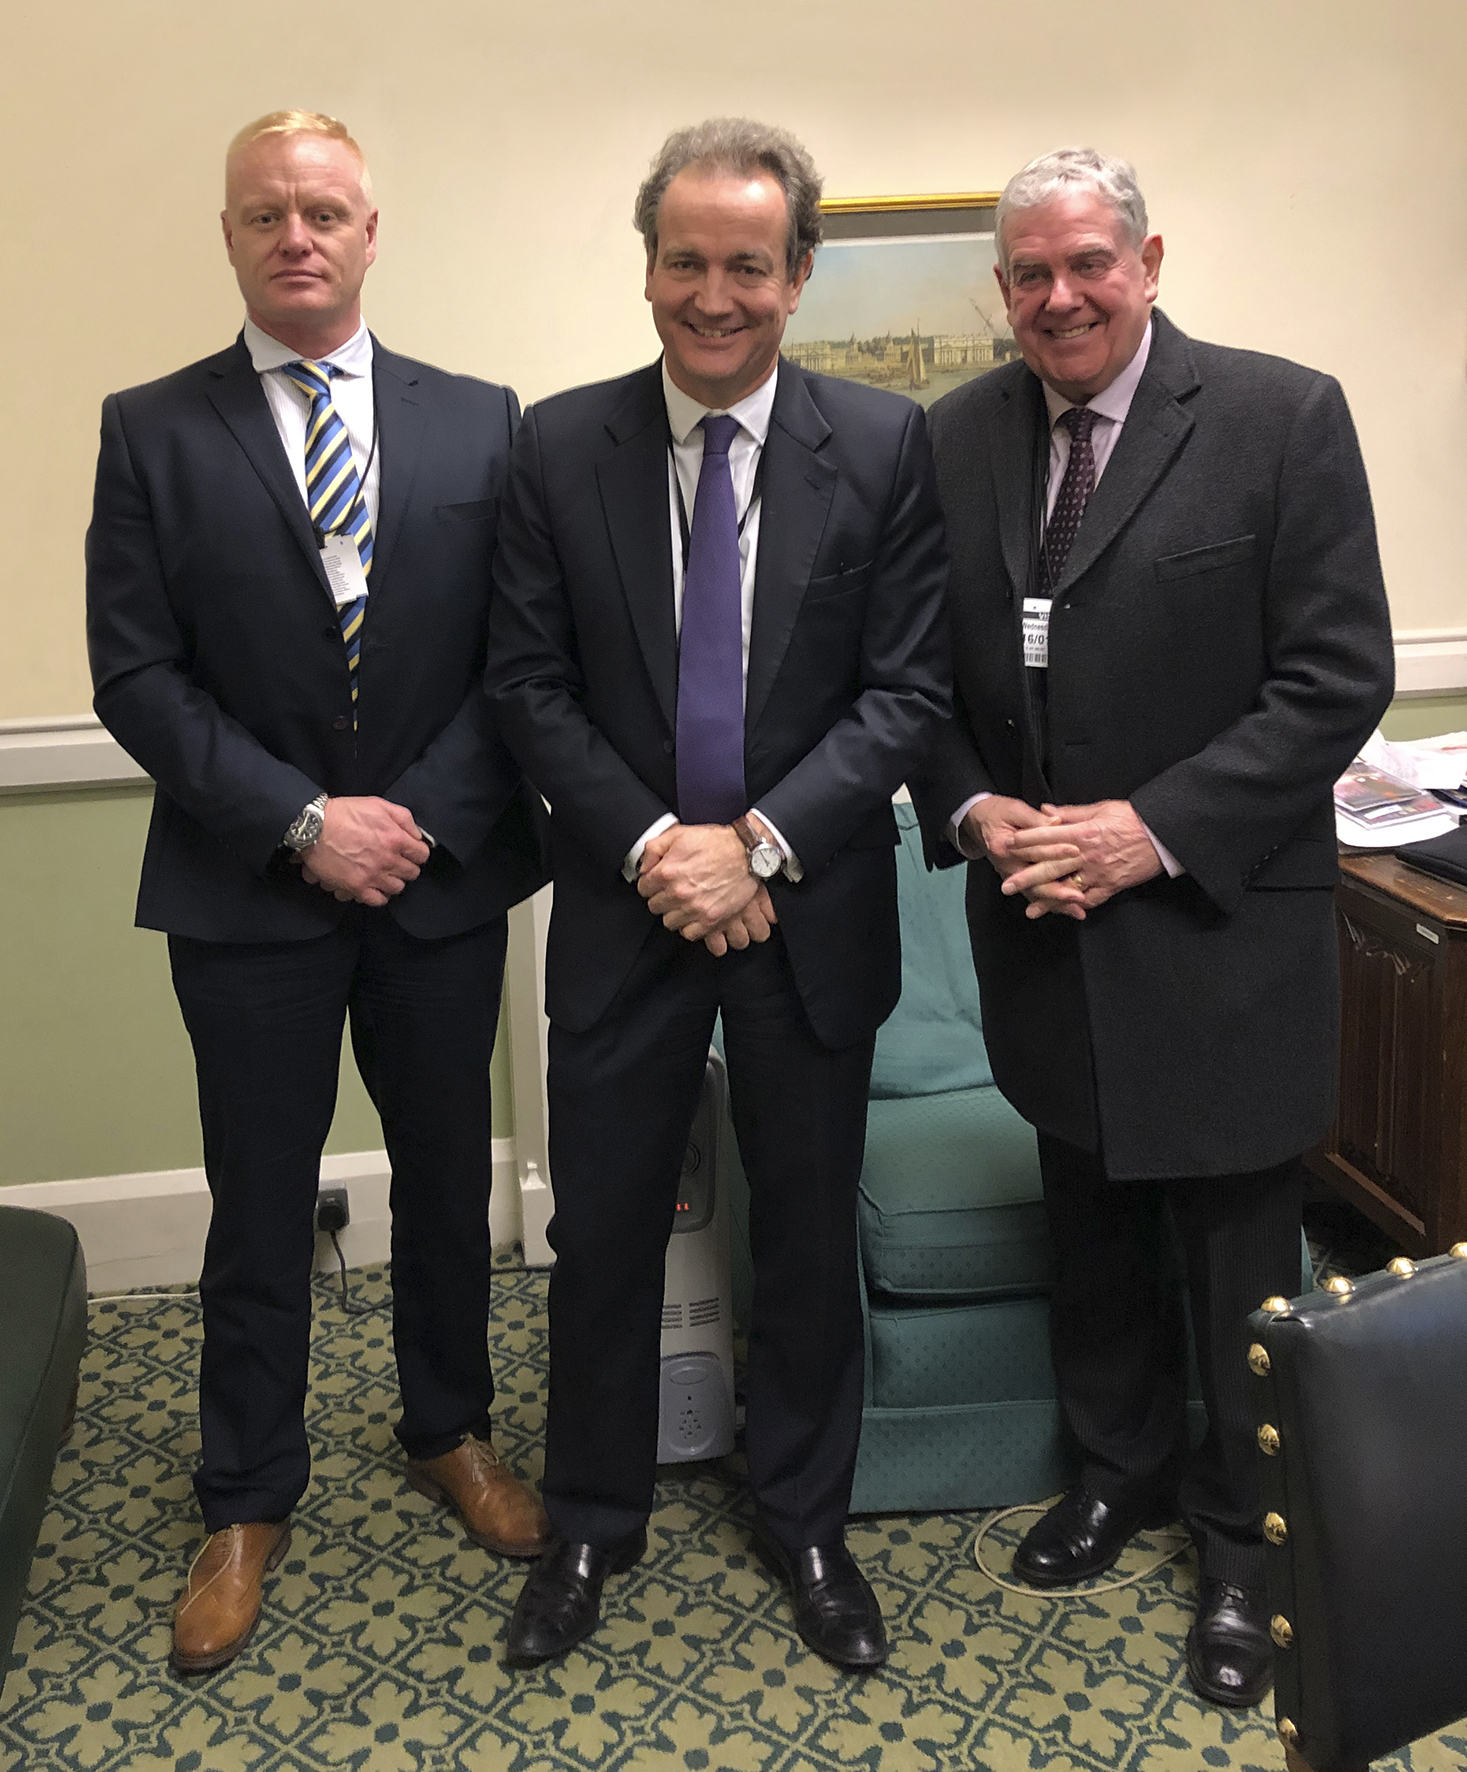 (TWFRA) Chair, Cllr. Barry Curran and Tyne and Wear Fire and Rescue Service (TWFRS) Chief Fire Officer, Chris Lowther met with Nick Hurd MP, Minister for Policing and the Fire Service at the Houses of Parliament.